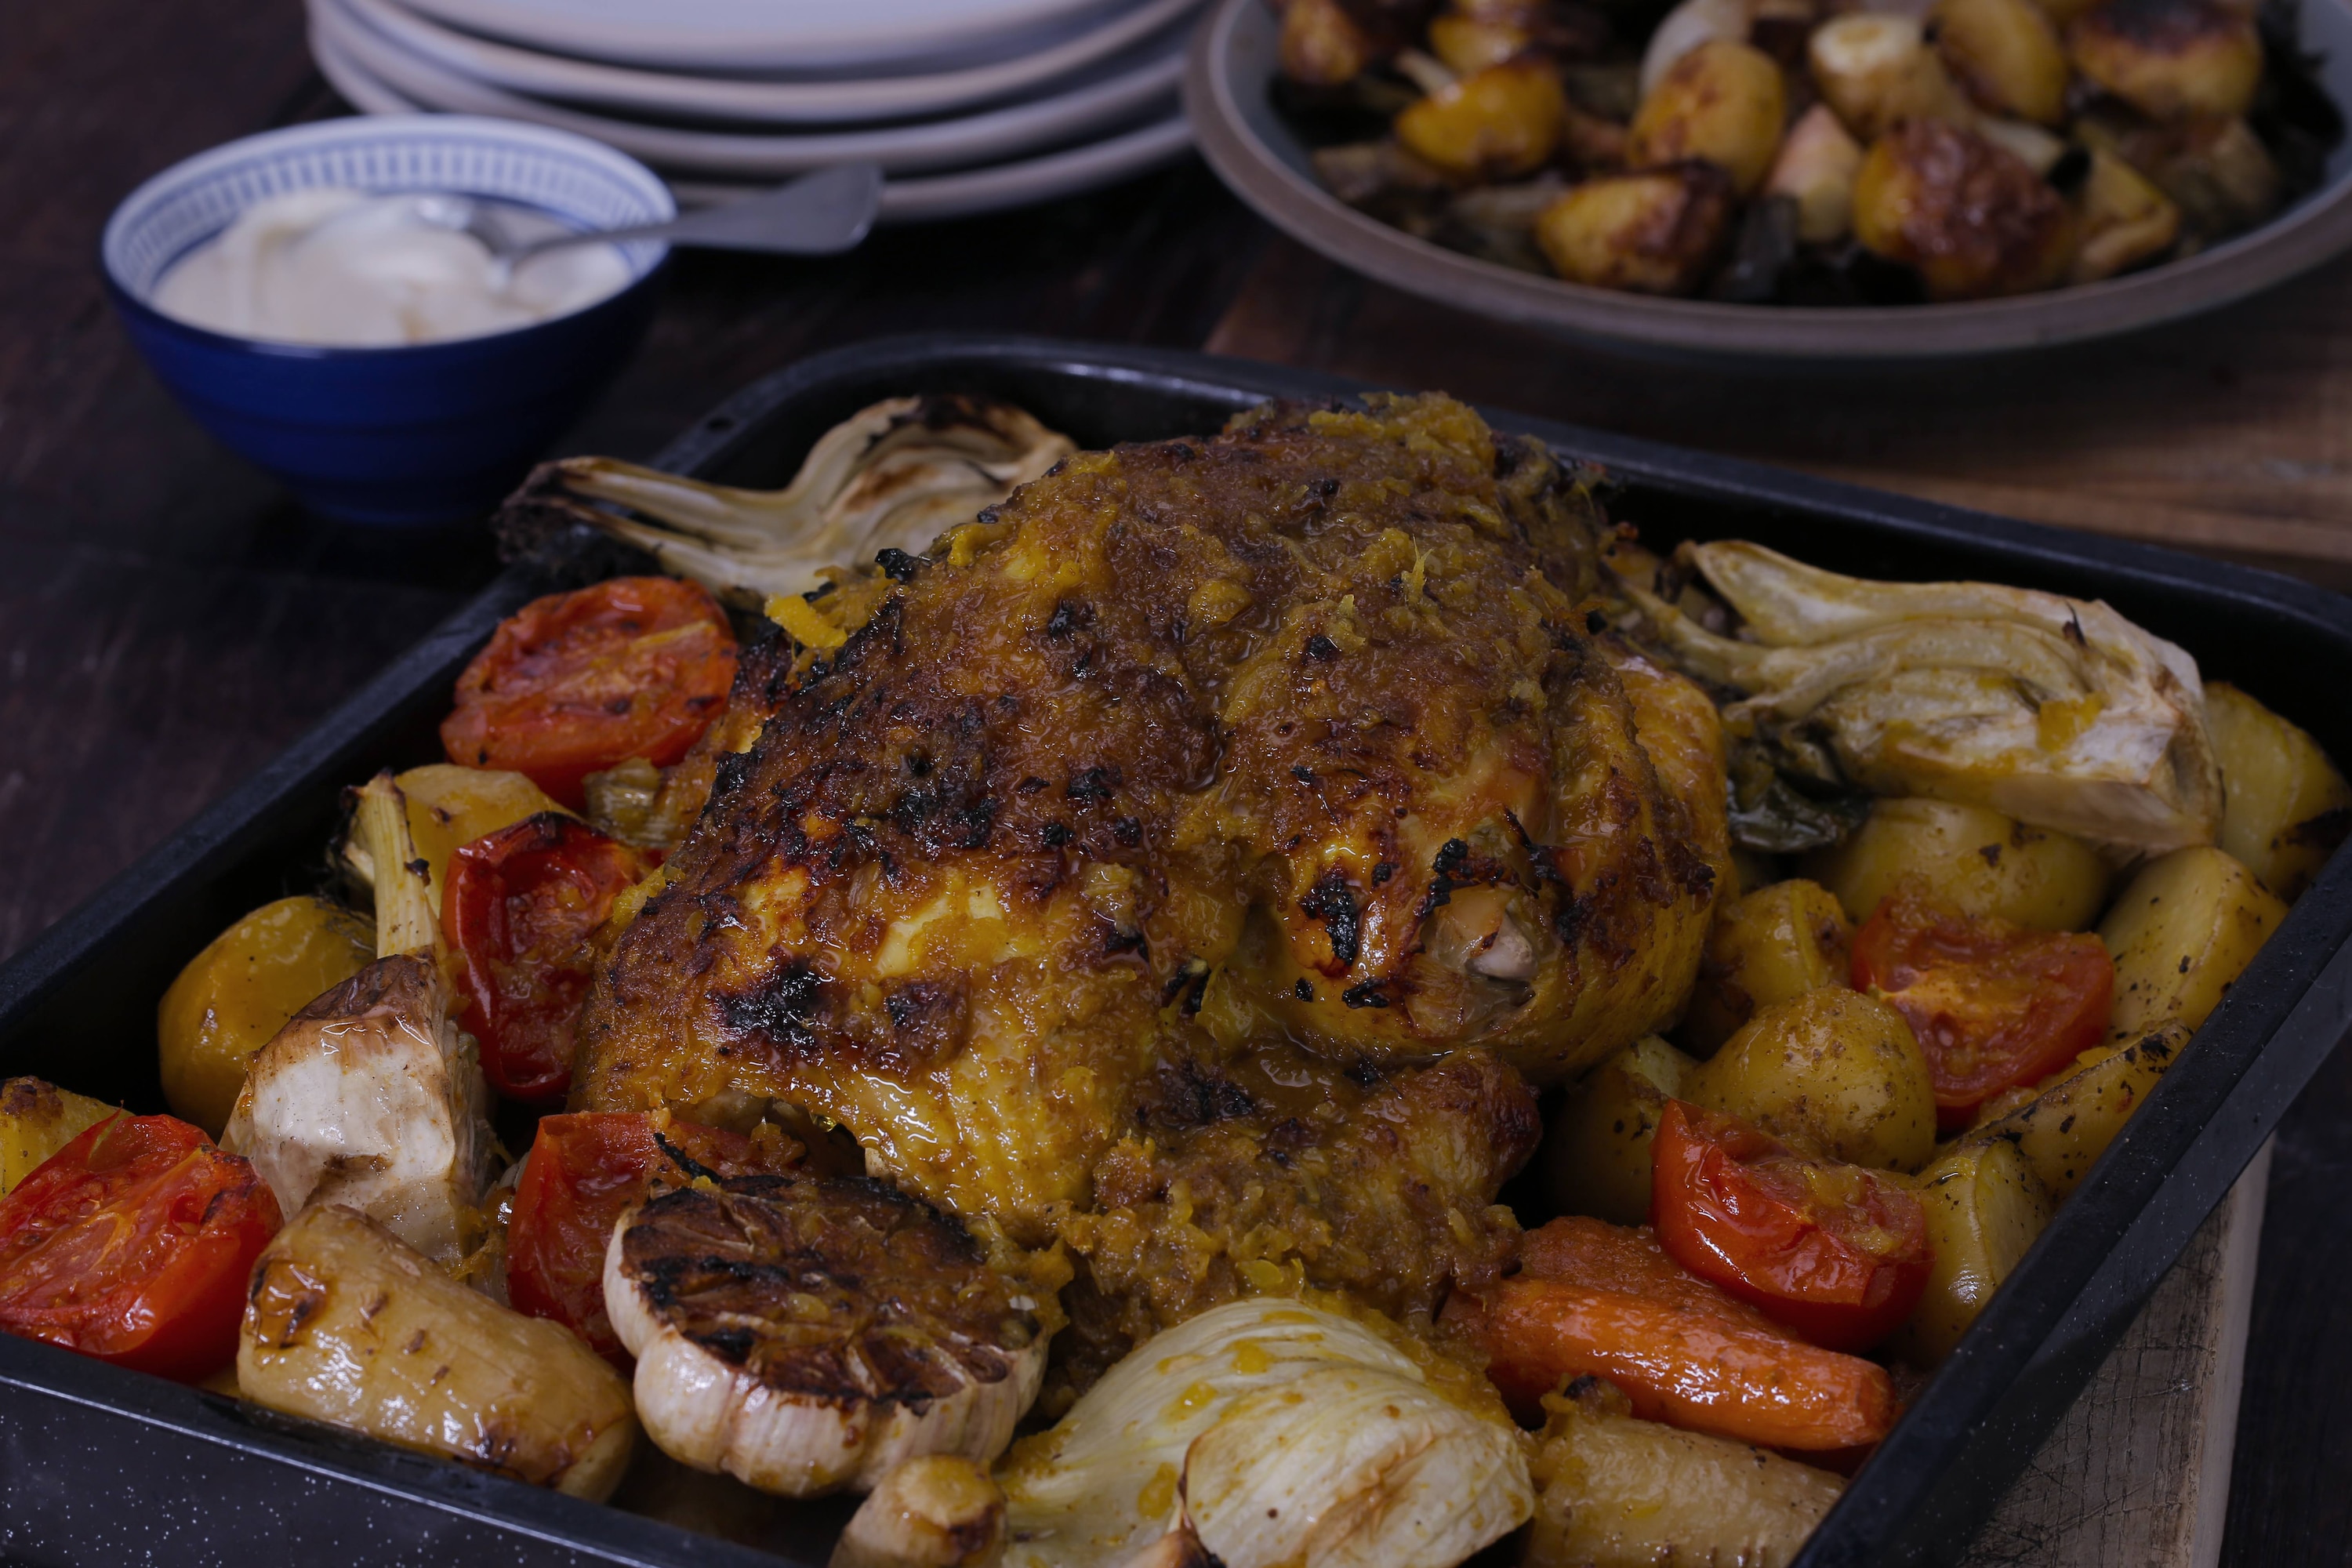 Roasted Chicken with Vegetables